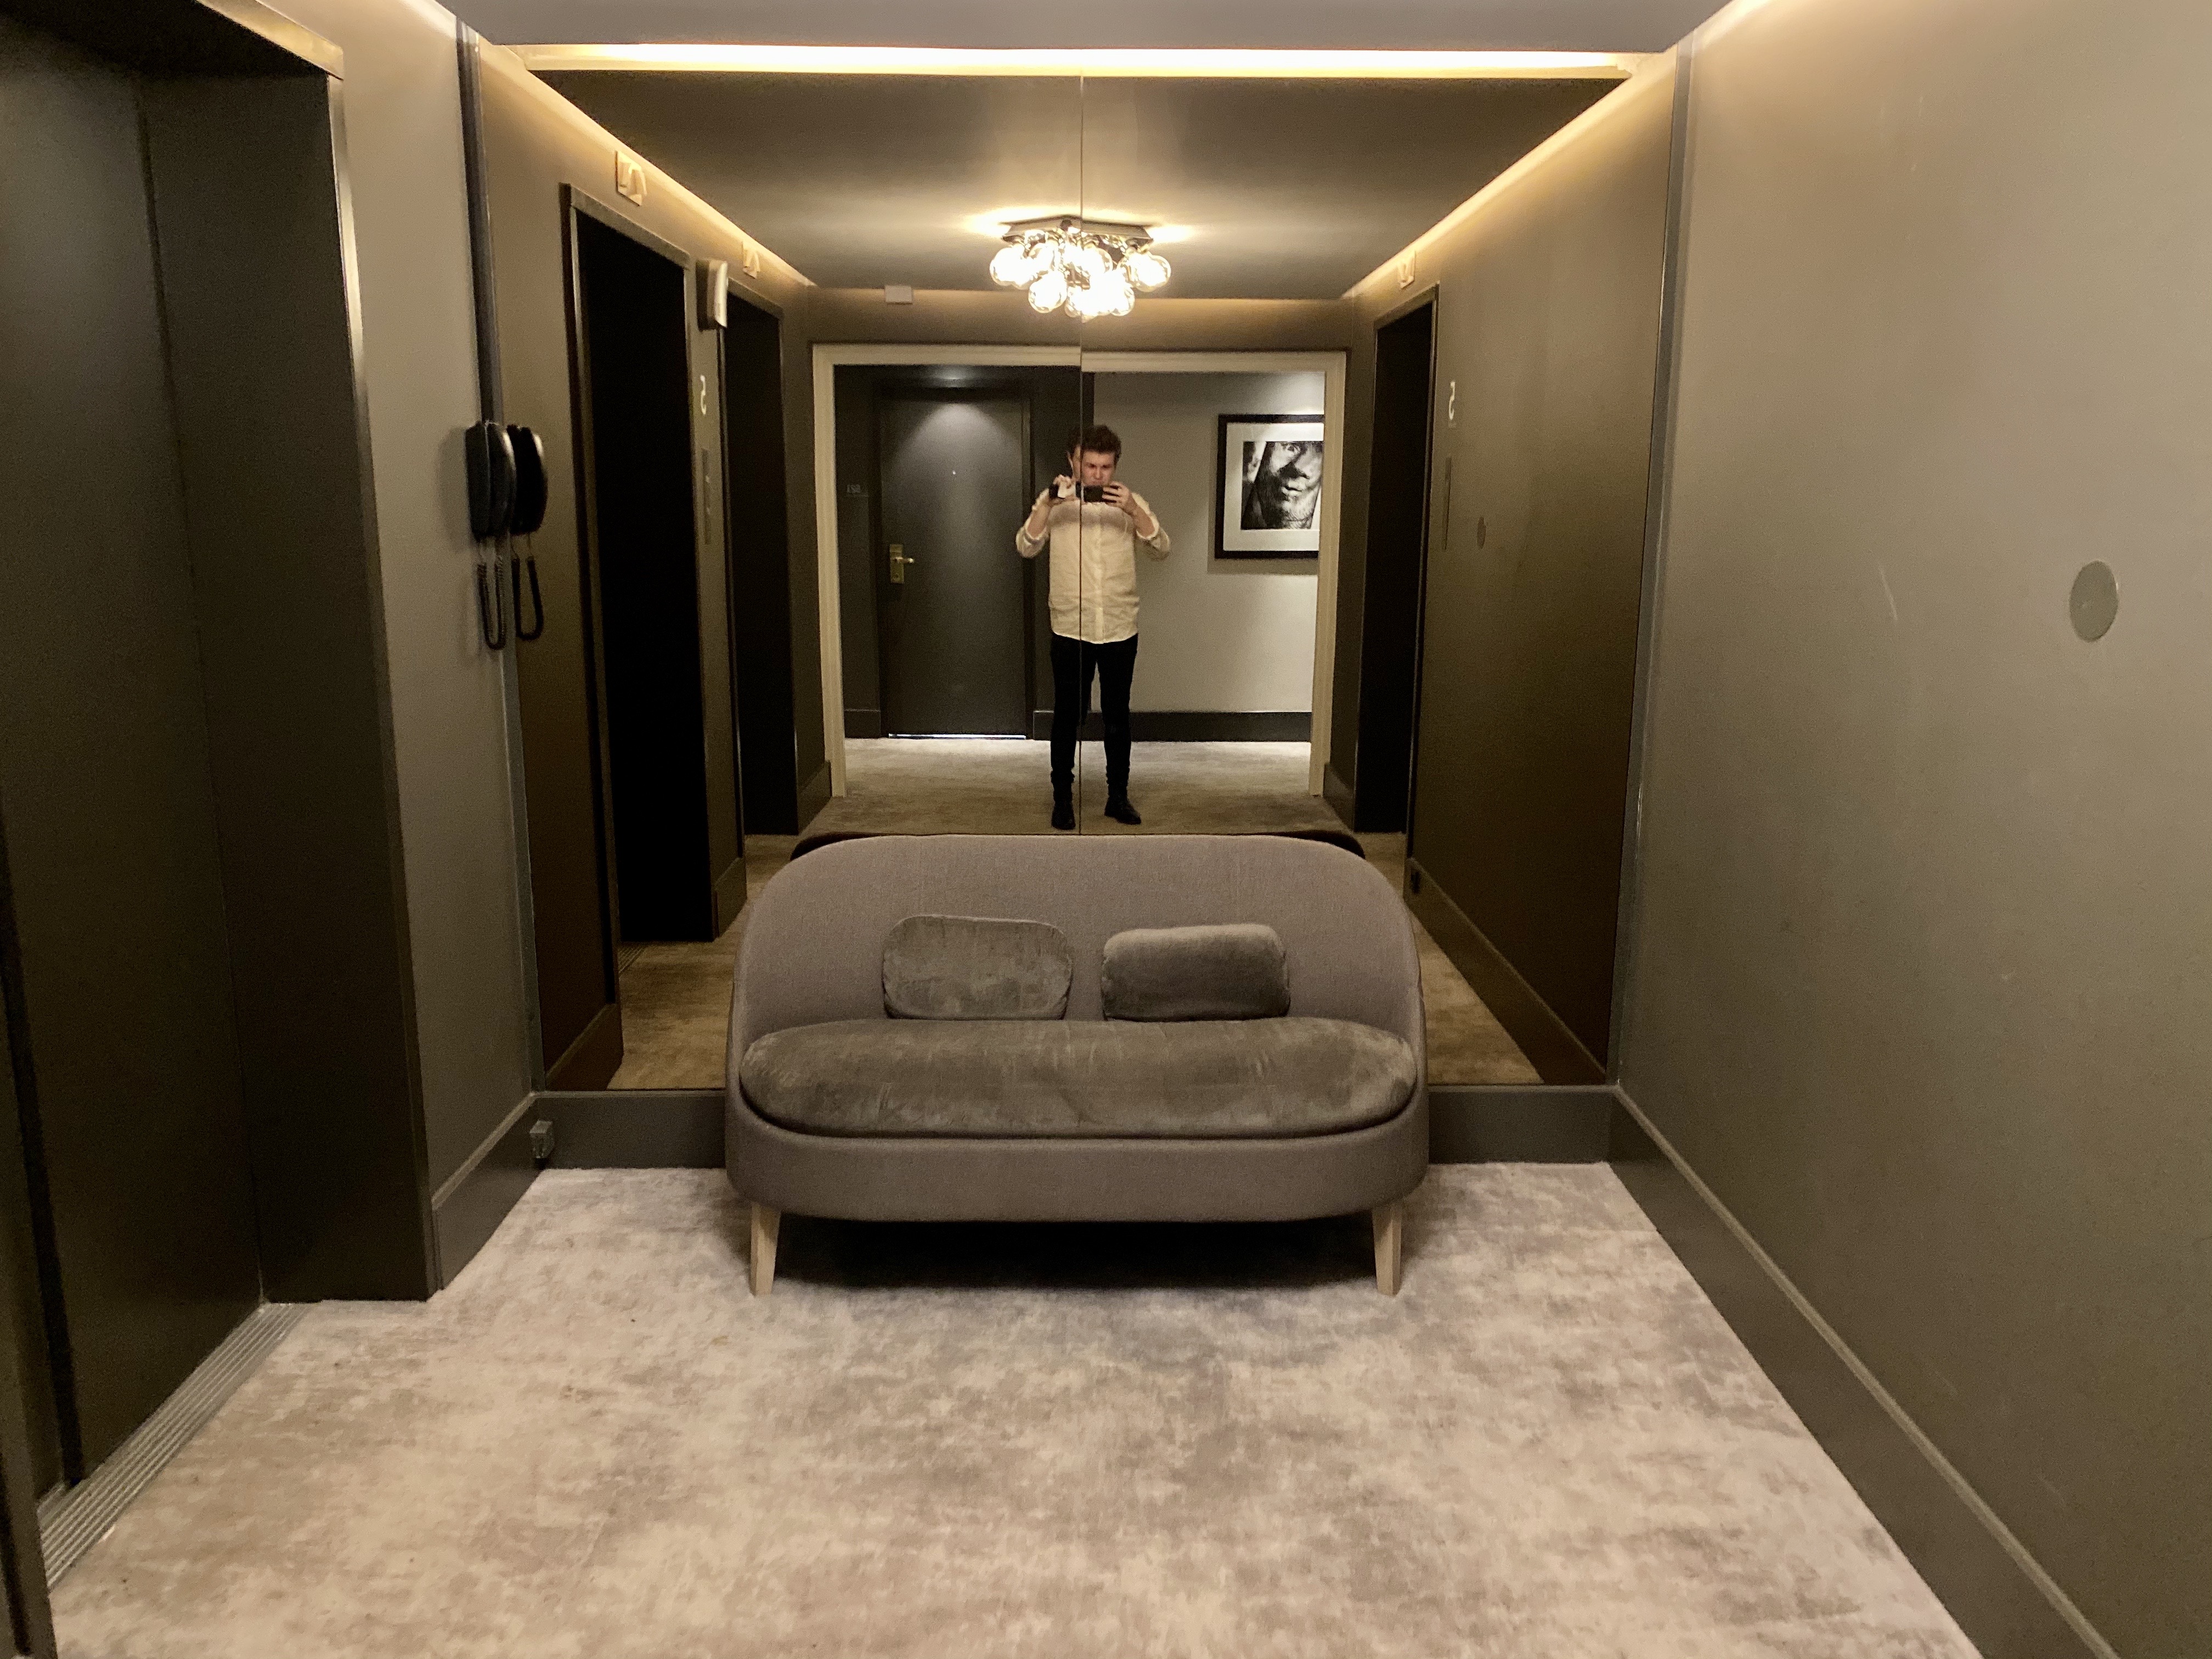 a man taking a picture of a couch in a hallway